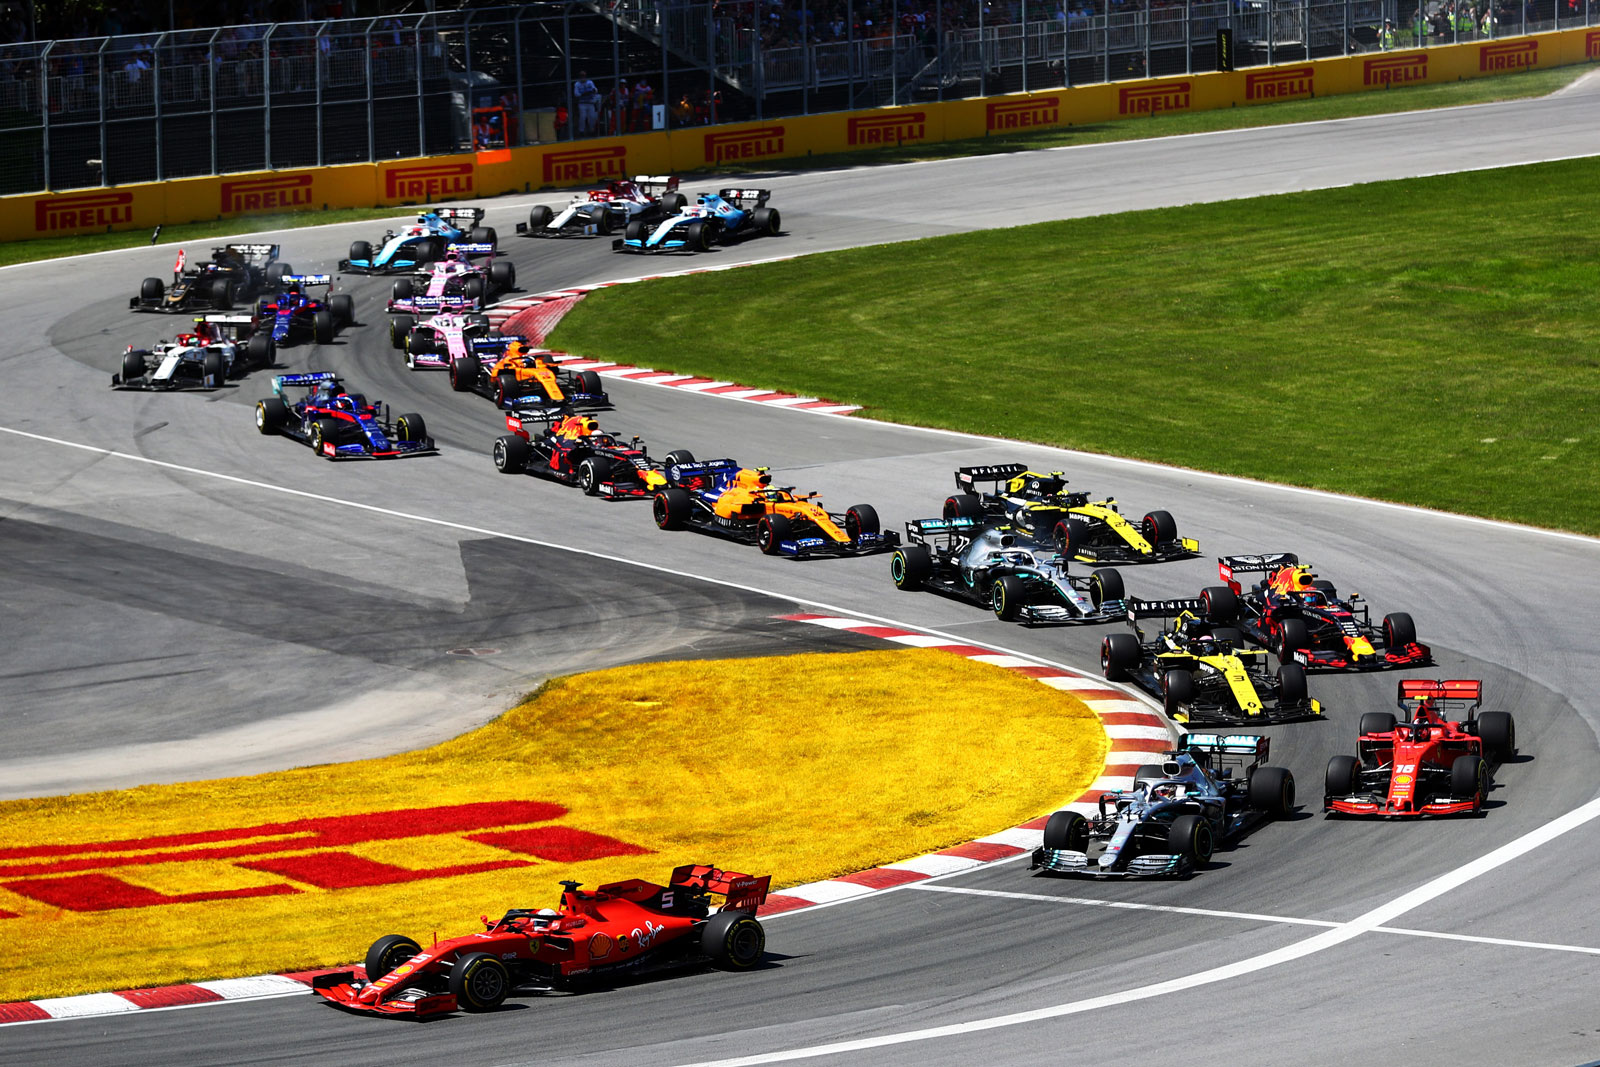 A Ferrari leads a train of 19 other Formula 1 cars around a chicane at the Canadian Grand Prix